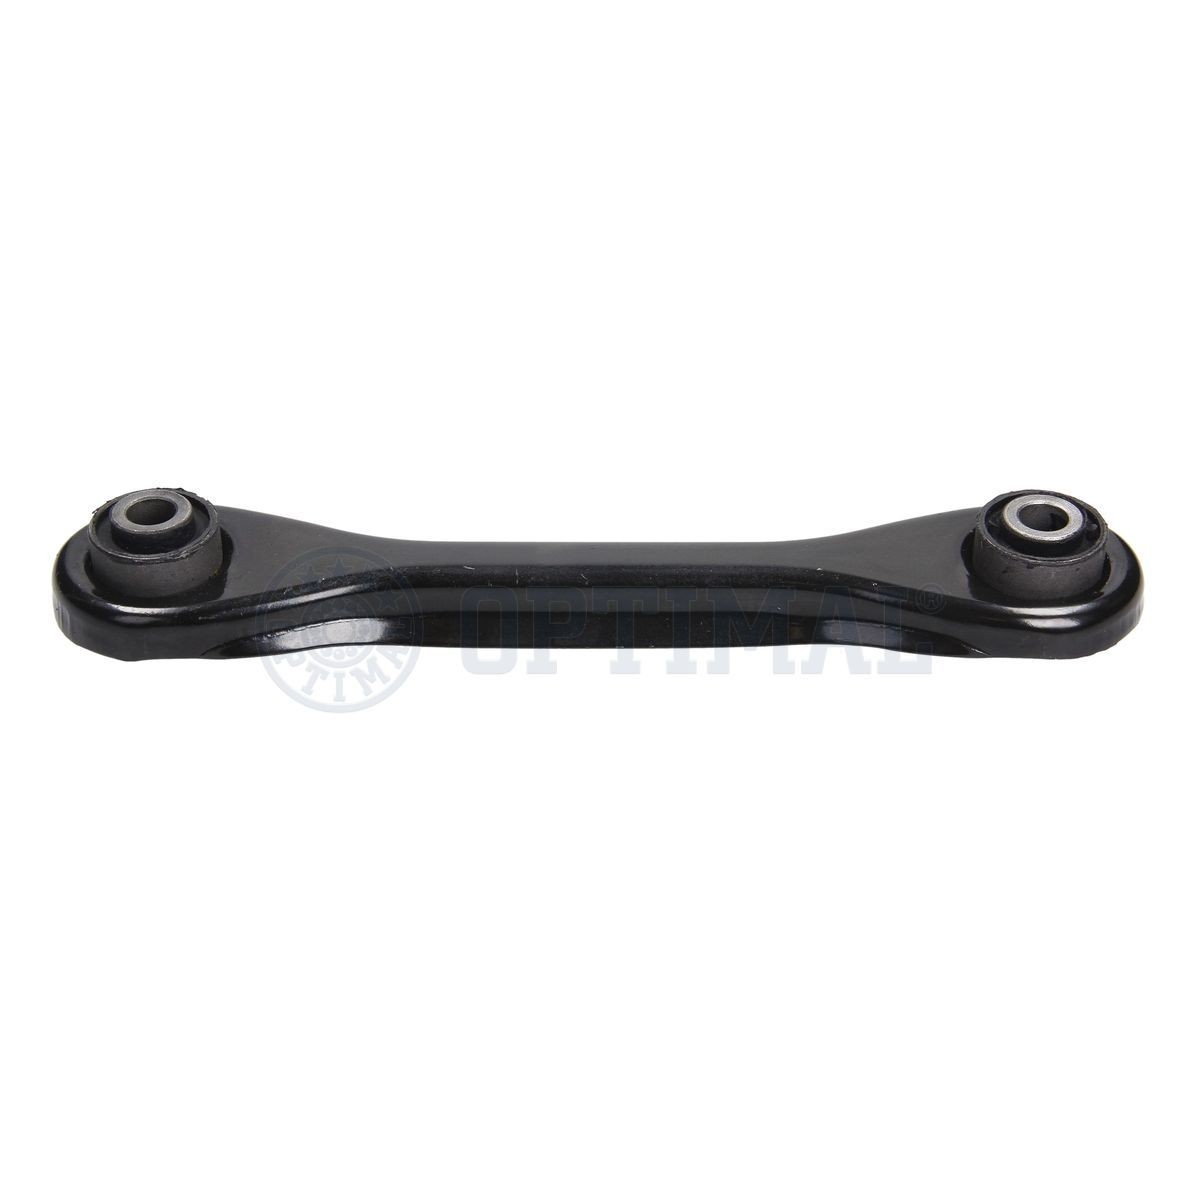 OPTIMAL G5-886 Suspension arm with rubber mount, Rear Axle, Lower, Front, both sides, Control Arm, Sheet Steel